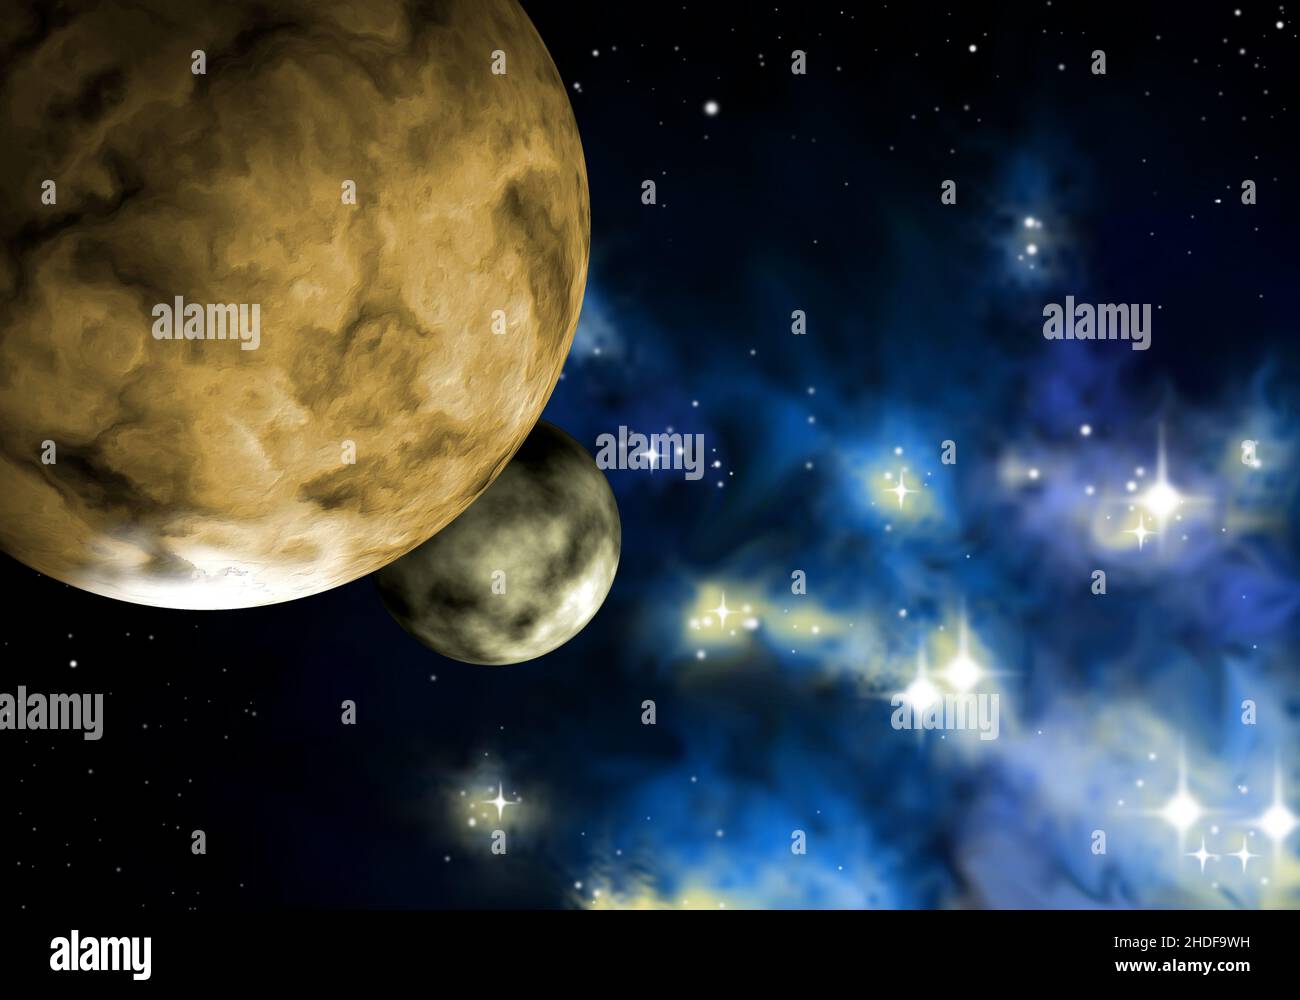 space, stars, planets, spaces, star, astronomy Stock Photo